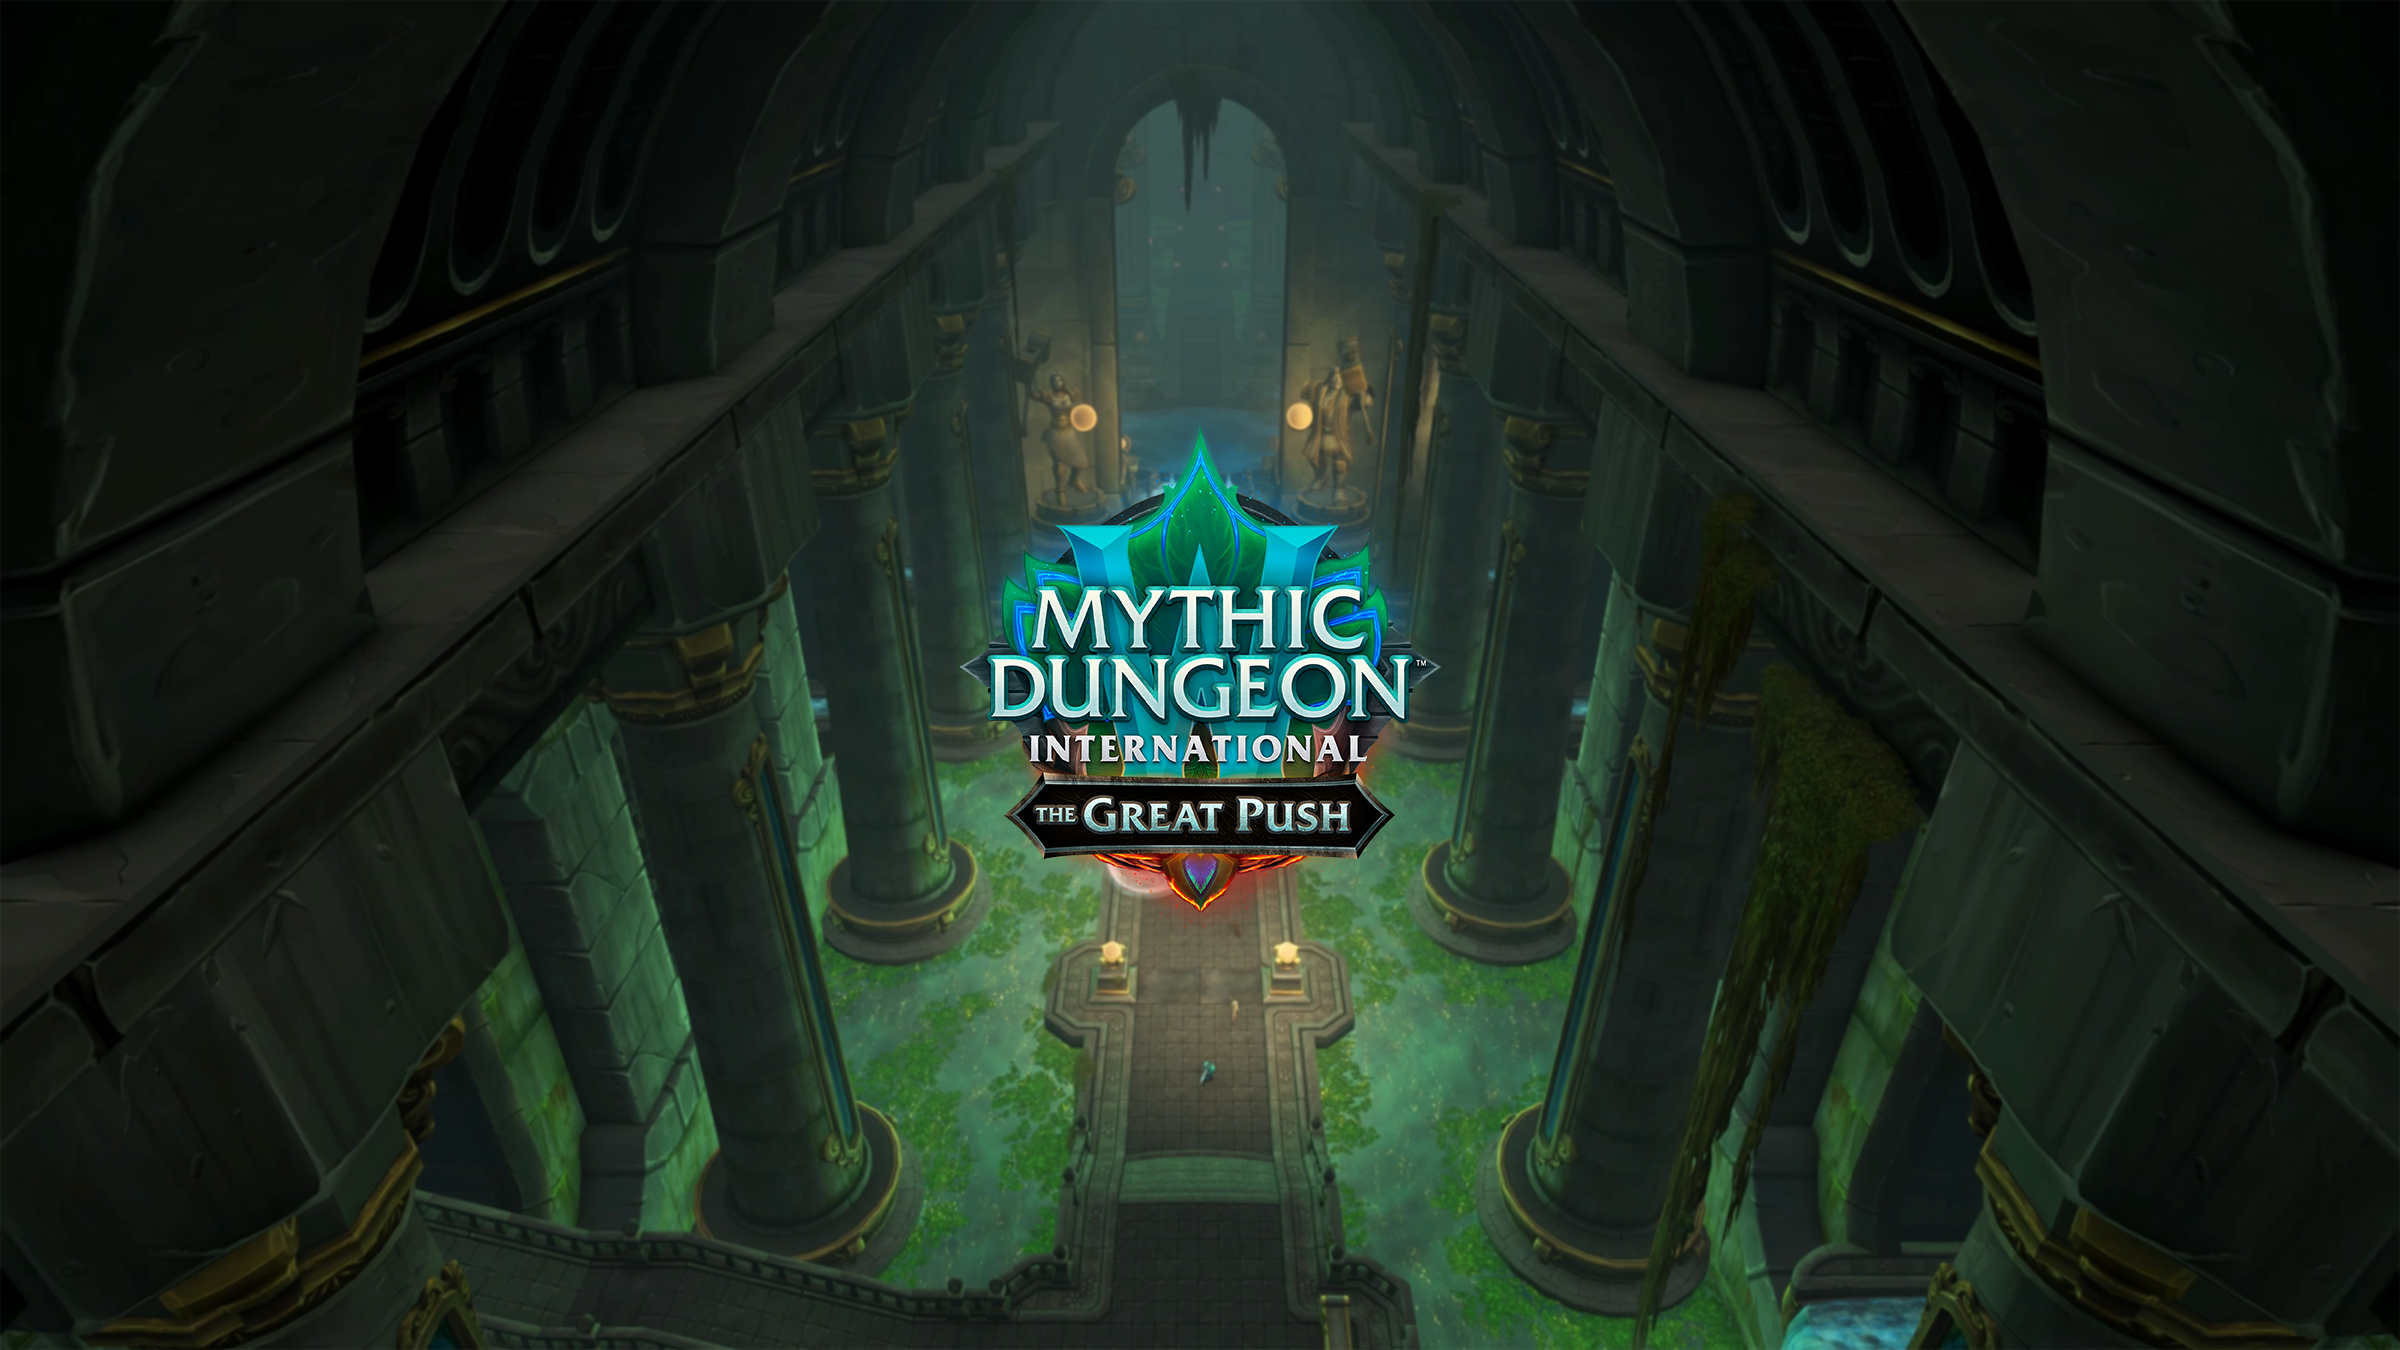 The Great Push is back in Dragonflight Season 4!